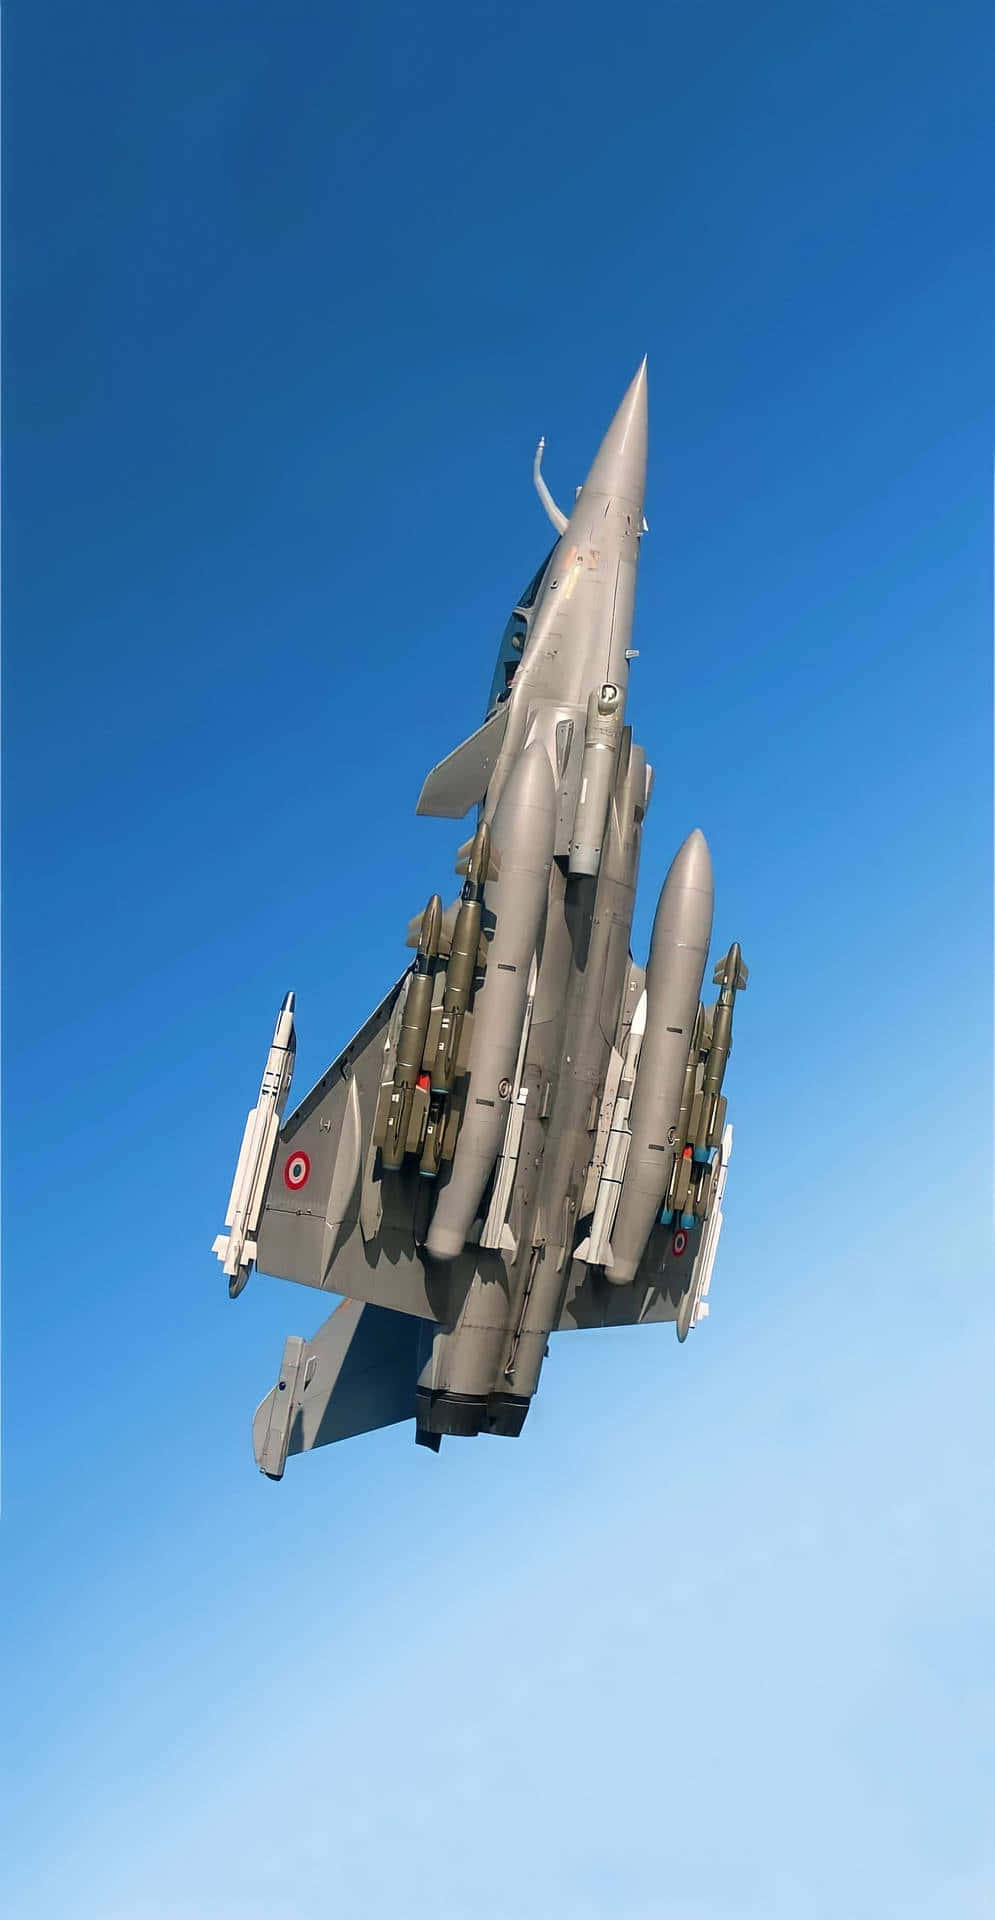 A Military Jet Flying In The Sky